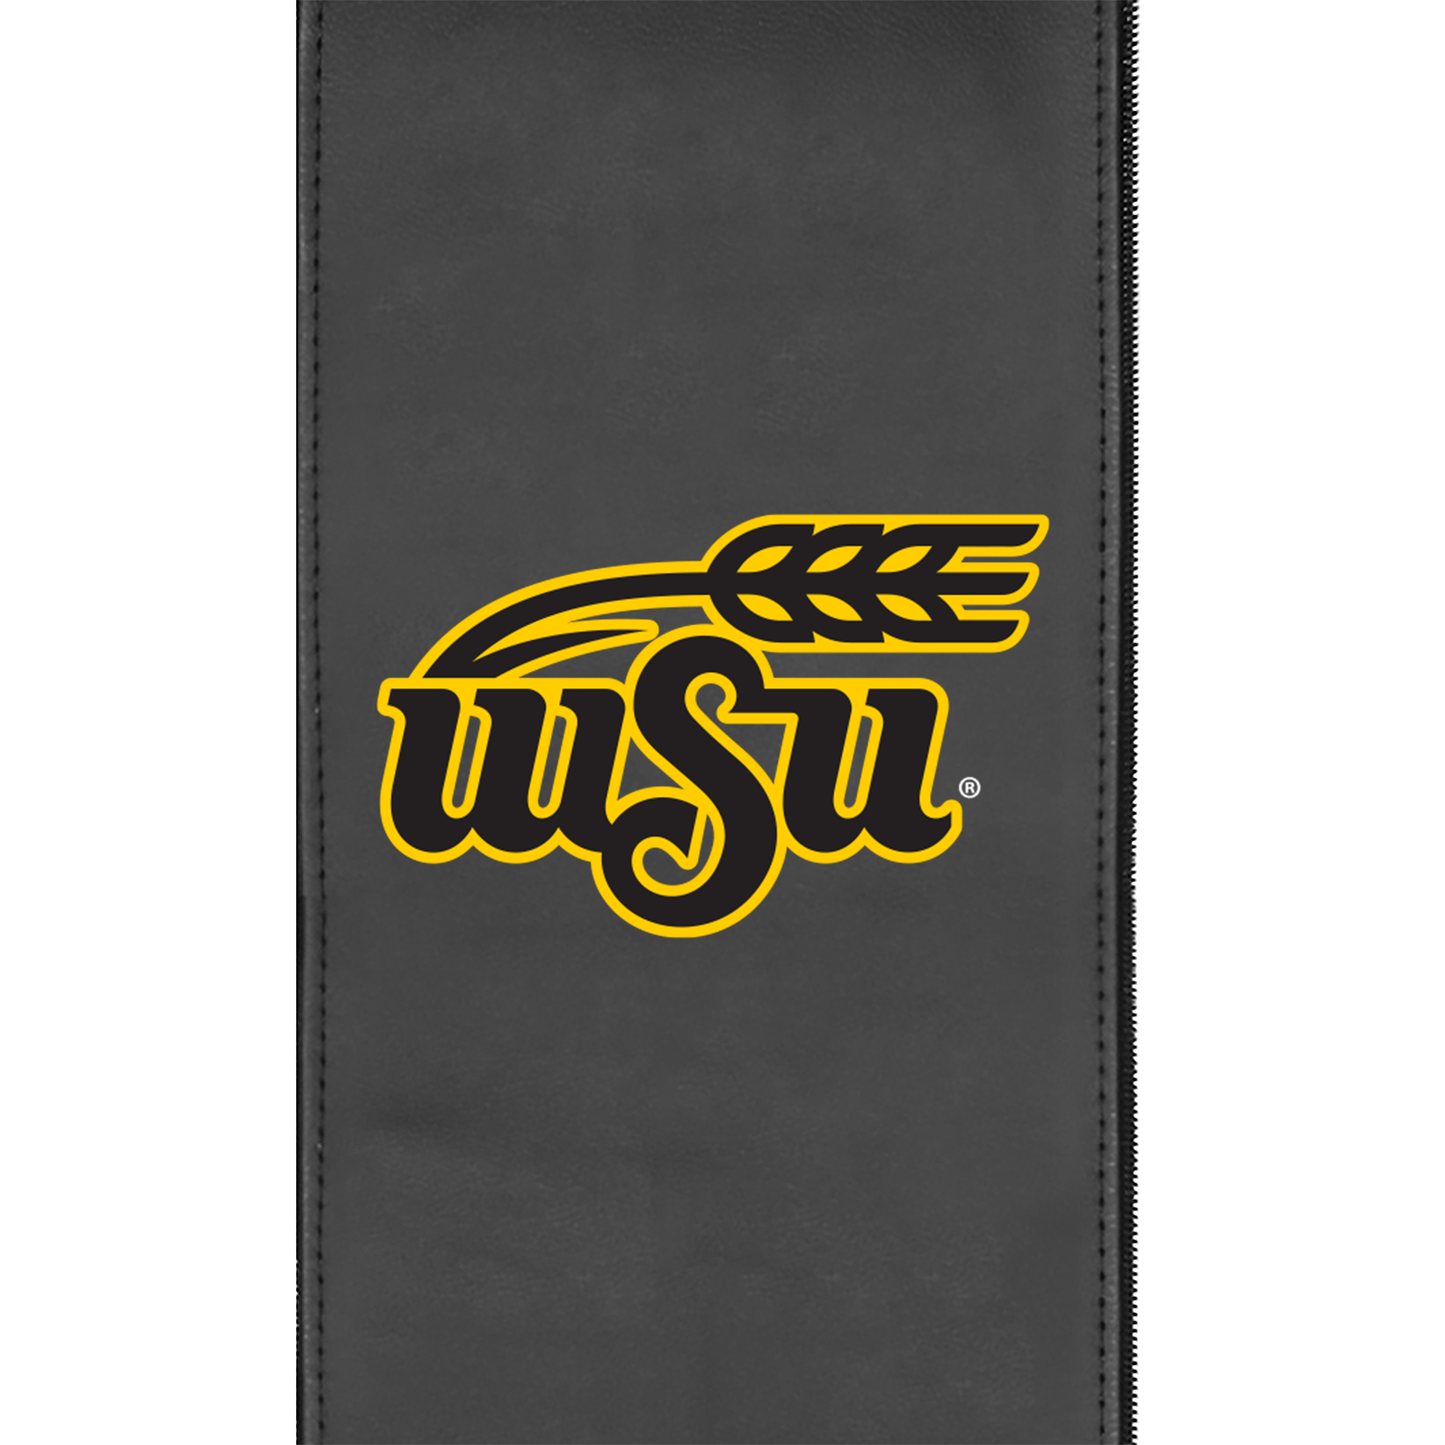 Office Chair 1000 with Wichita State Primary Logo